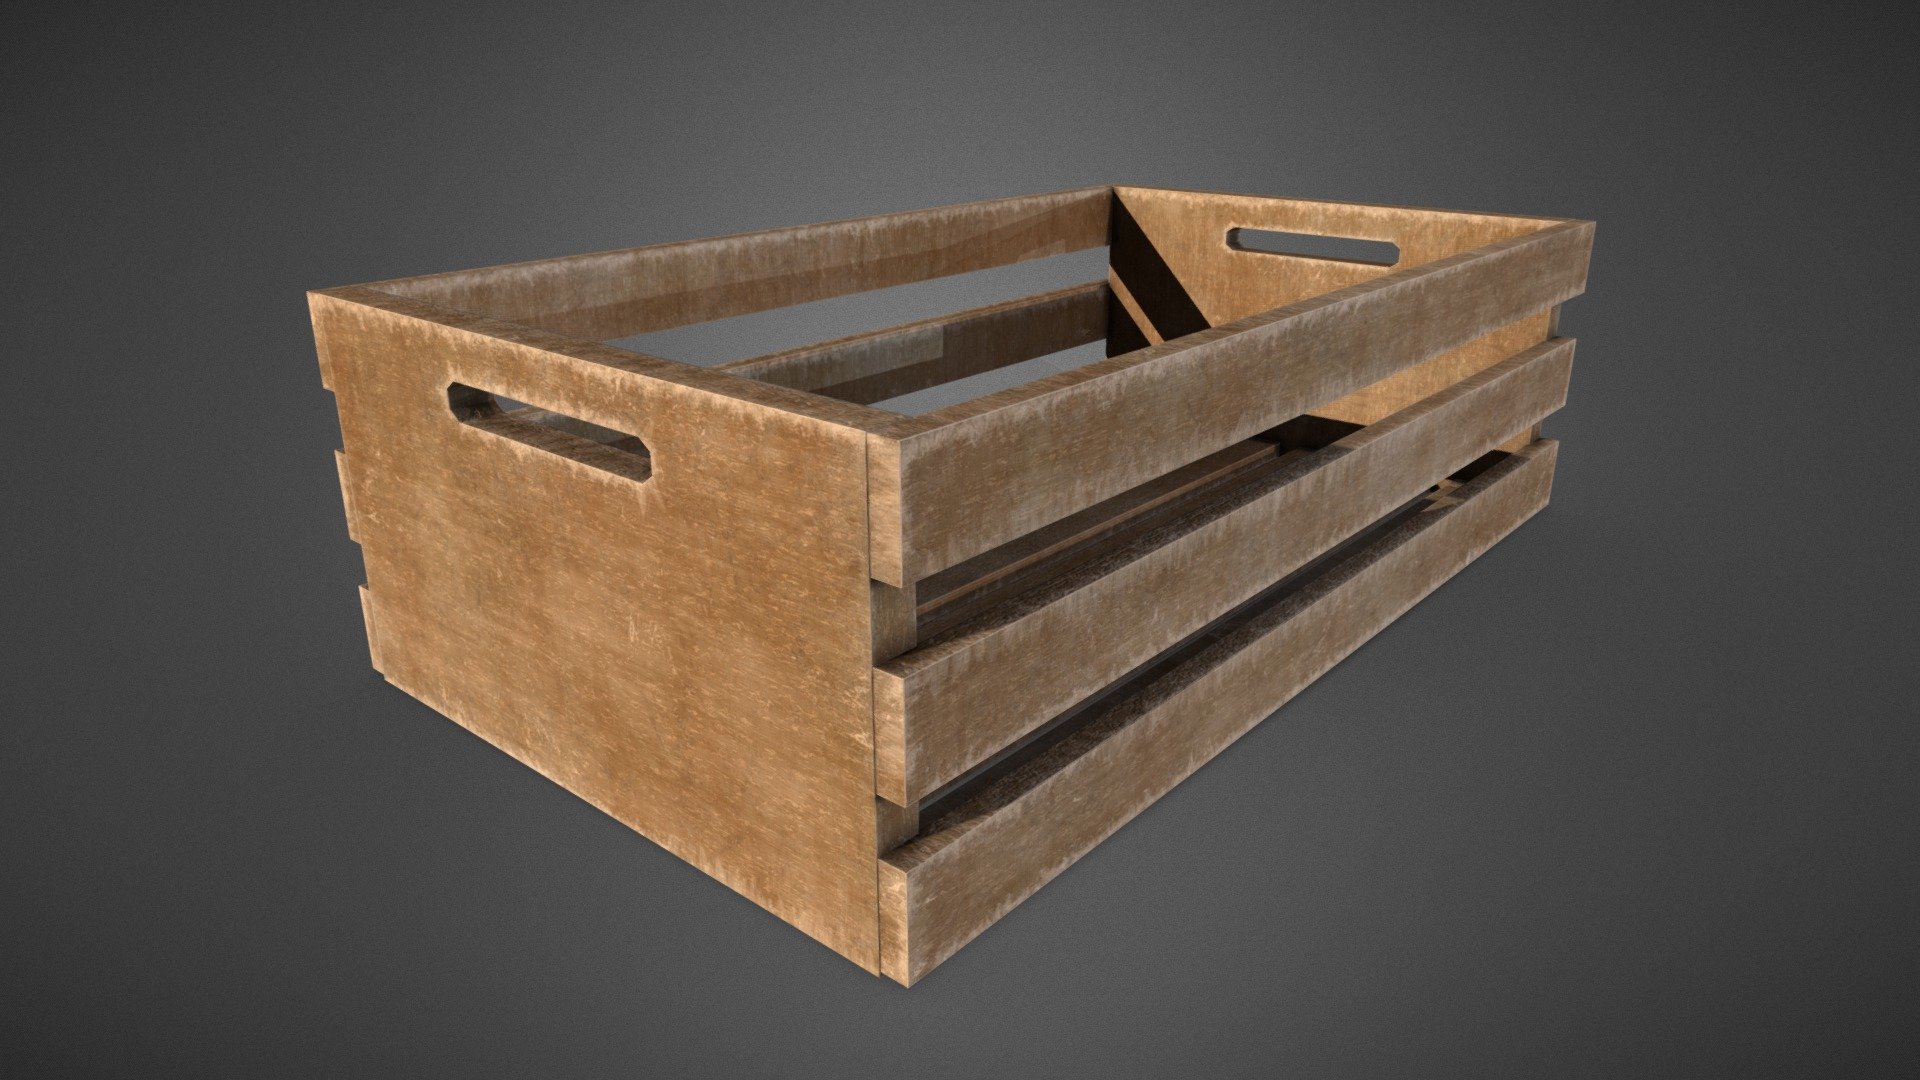 This is a wooden crate asset created for environments as decoration, could be used in storage environments and warehouses, made in blender and textured in substance painter - Wooden Crate 3d model - 3D model by IPfuentes 3d model